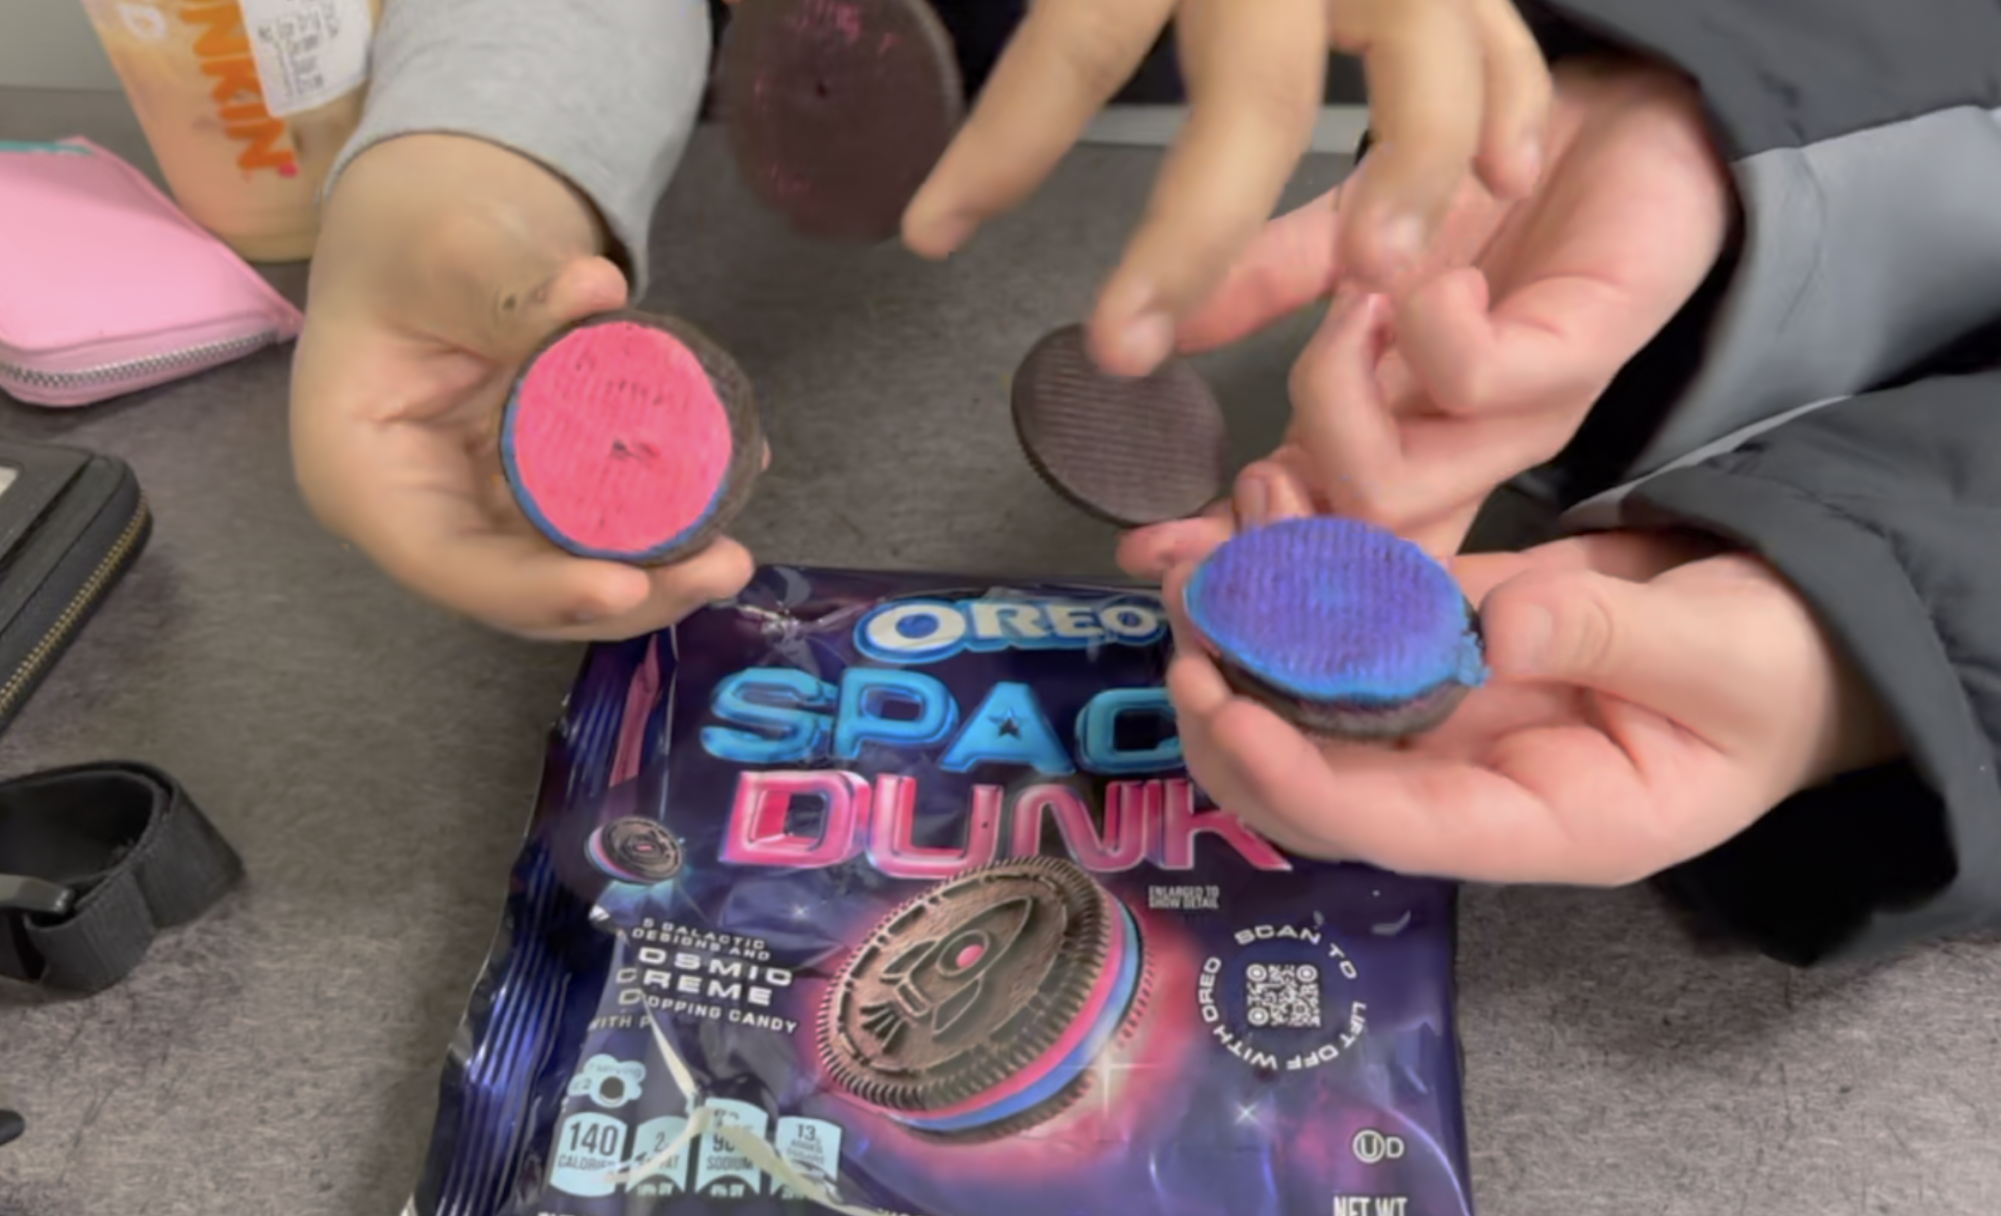 We Tried Them! Space Dunk Oreos